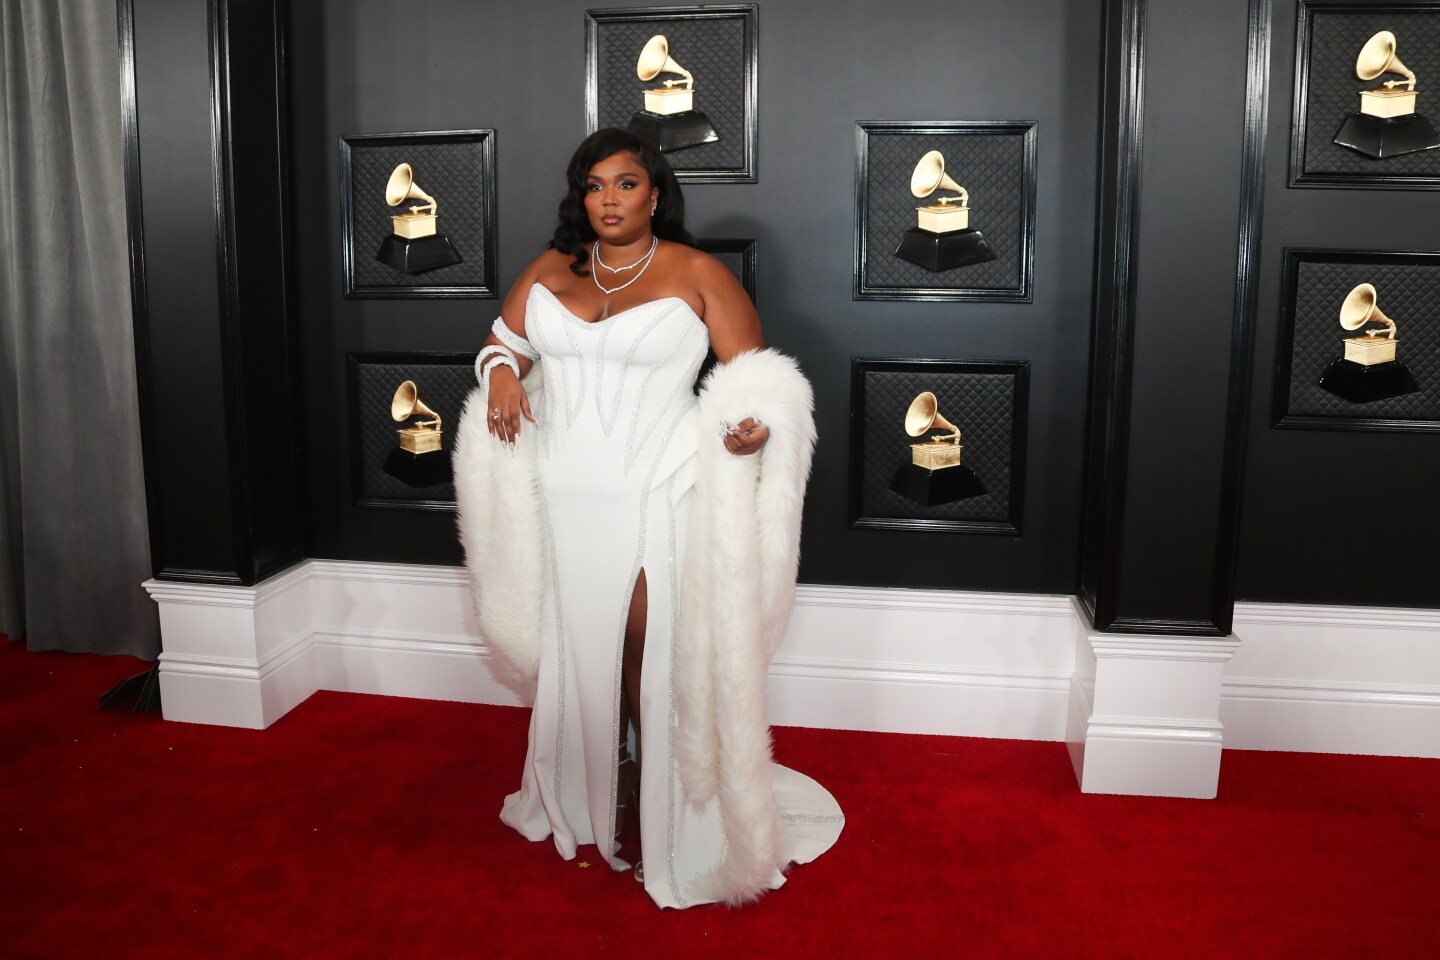 Lizzo arriving at the 62nd GRAMMY Awards.